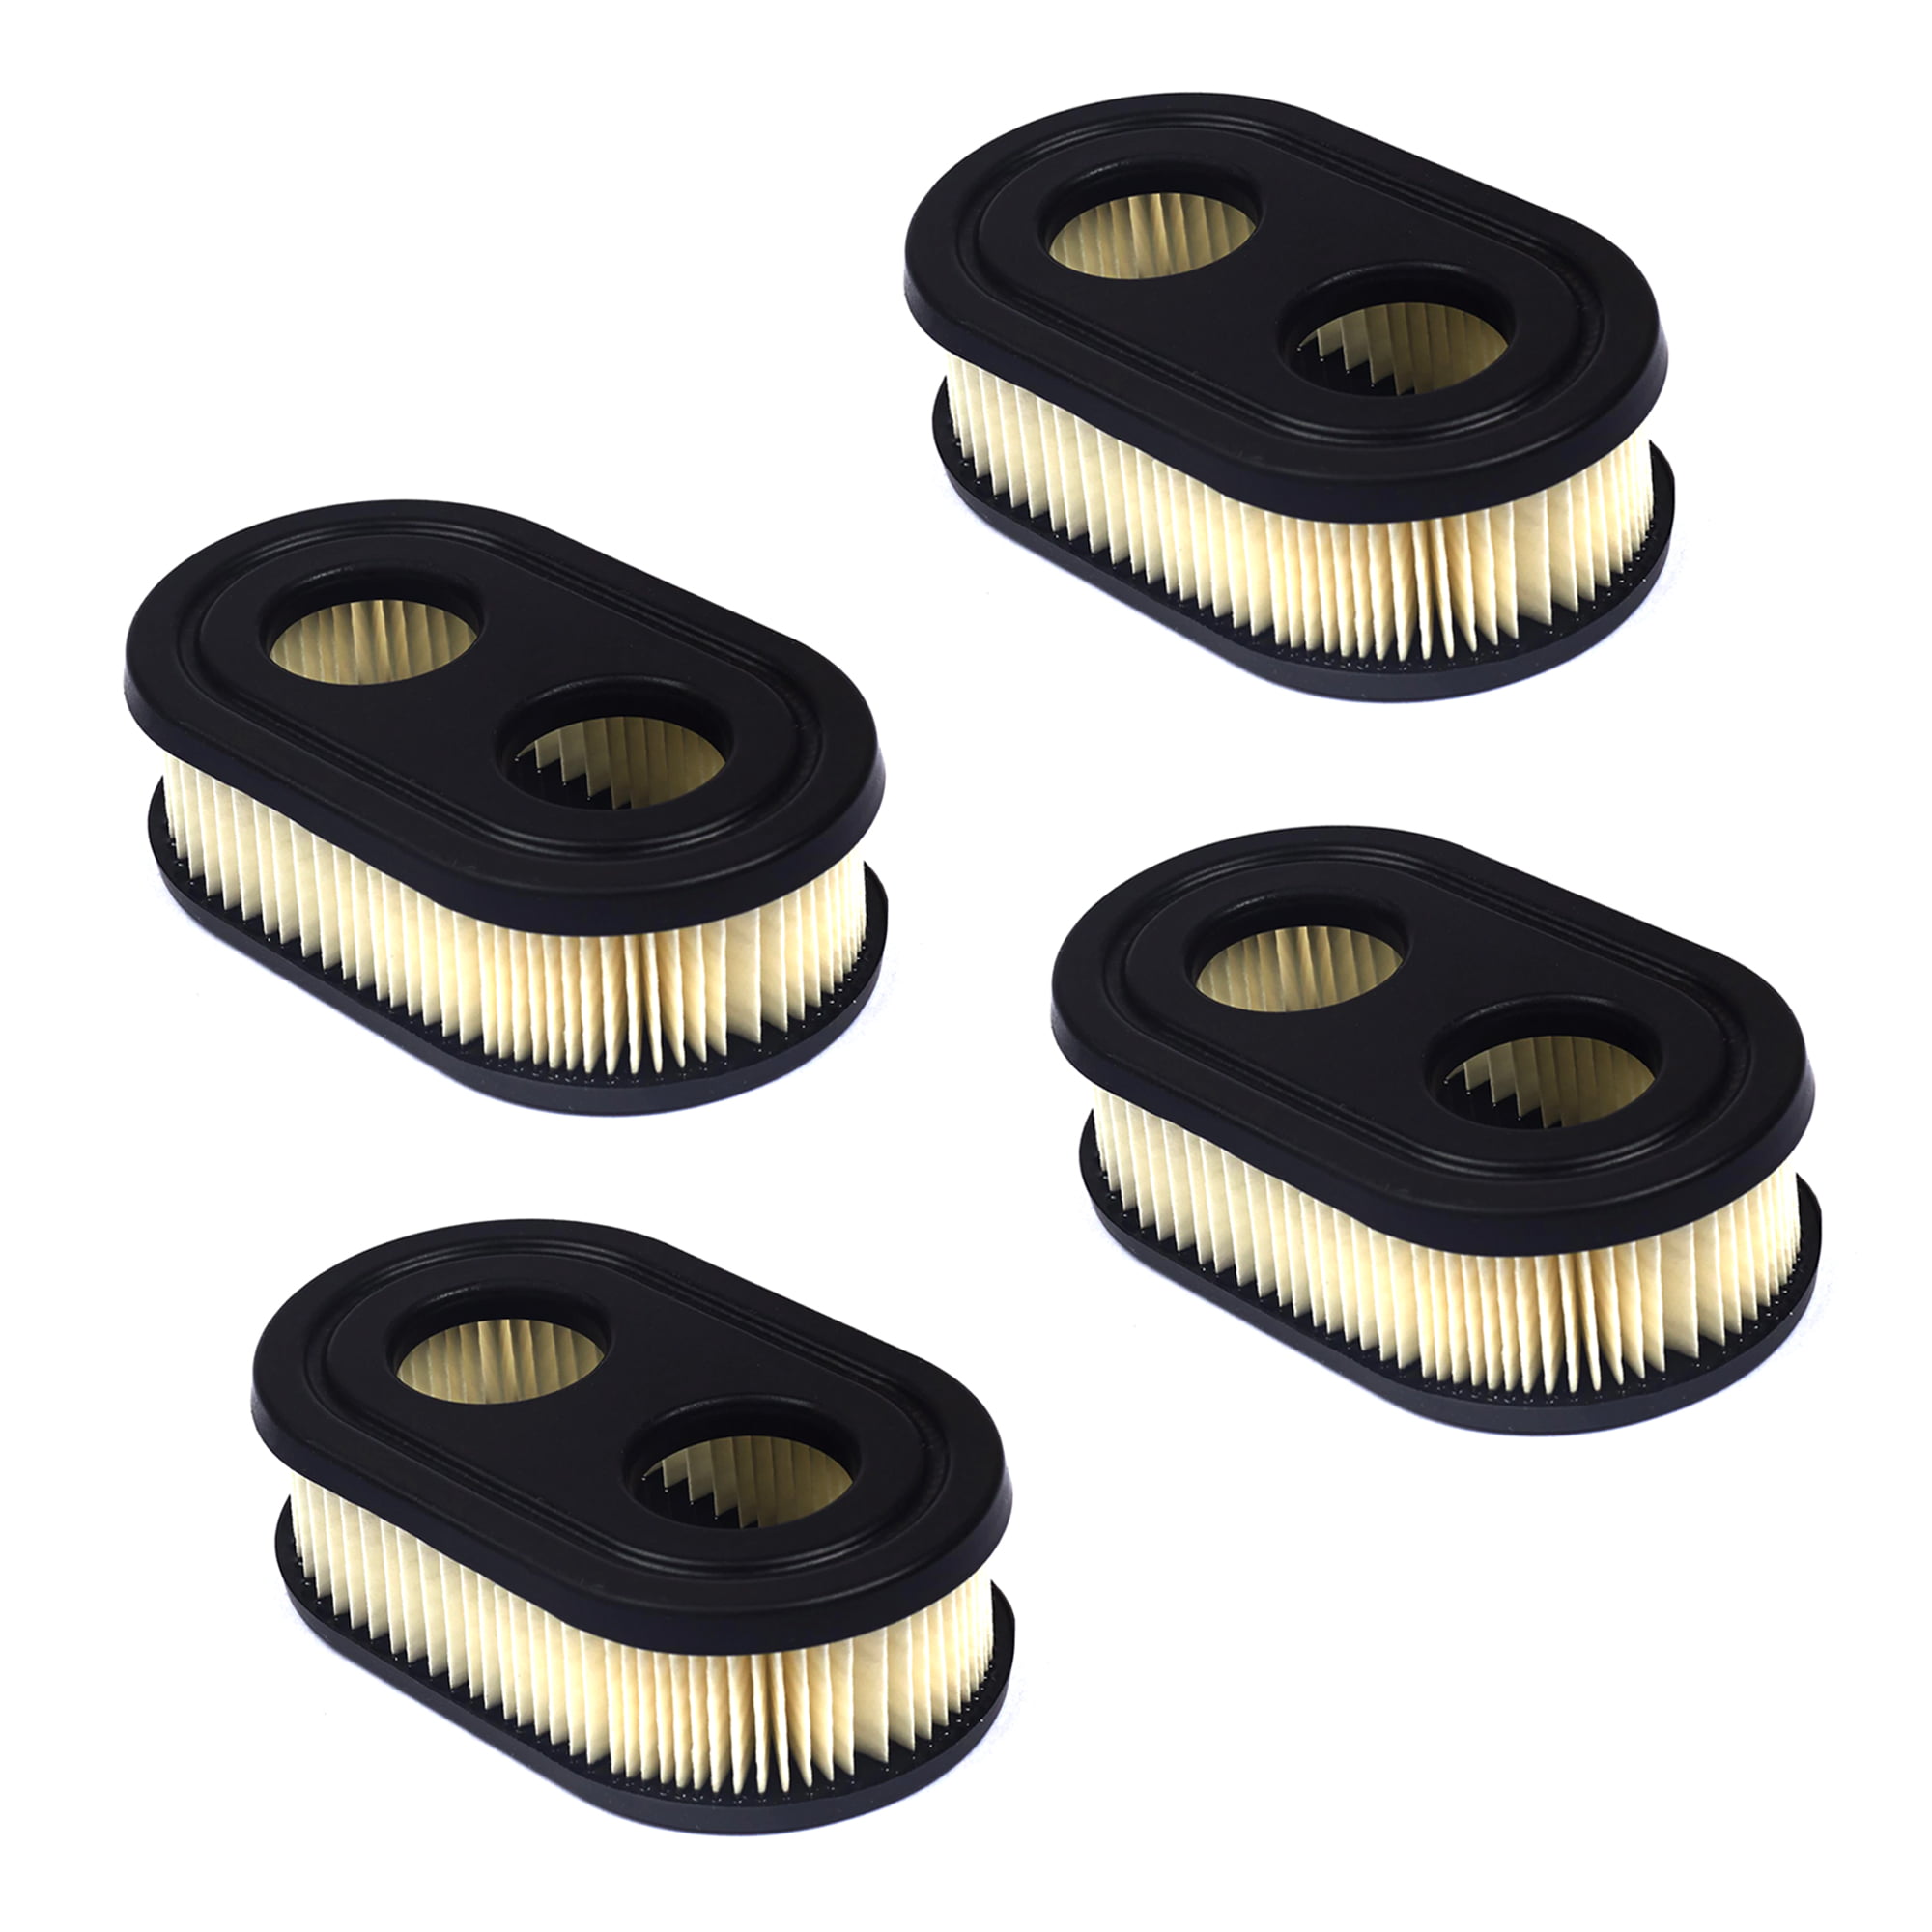 5 PACK Air Filter Fits For Briggs & Stratton Part # 798452 593260 4247 5432